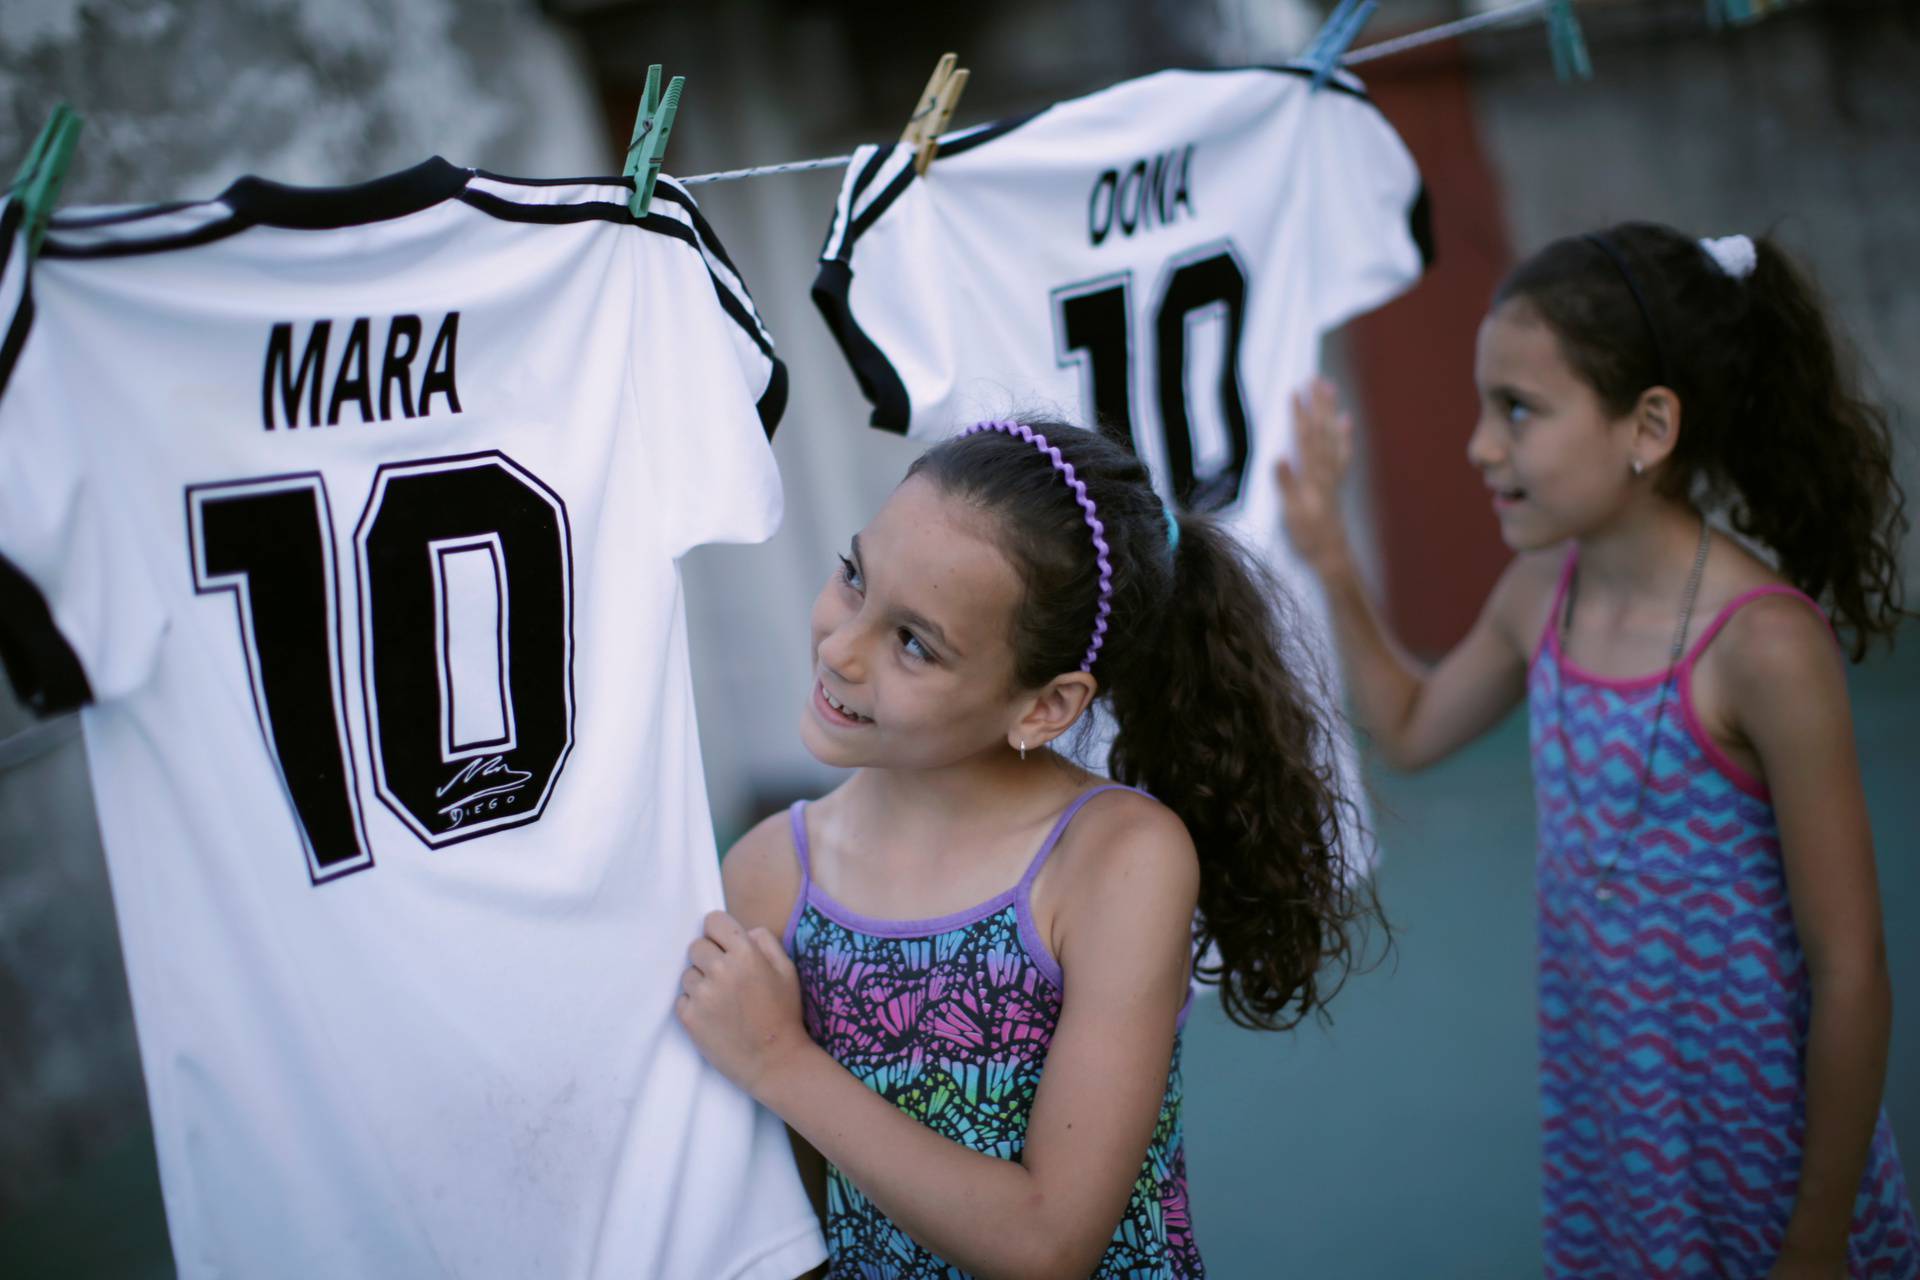 Mara and Dona, twin daughters of Walter Gaston Rotundo,a devoted Diego Maradona fan who named his daughters after the soccer star, look at t-shirts with their names, in Buenos Aires